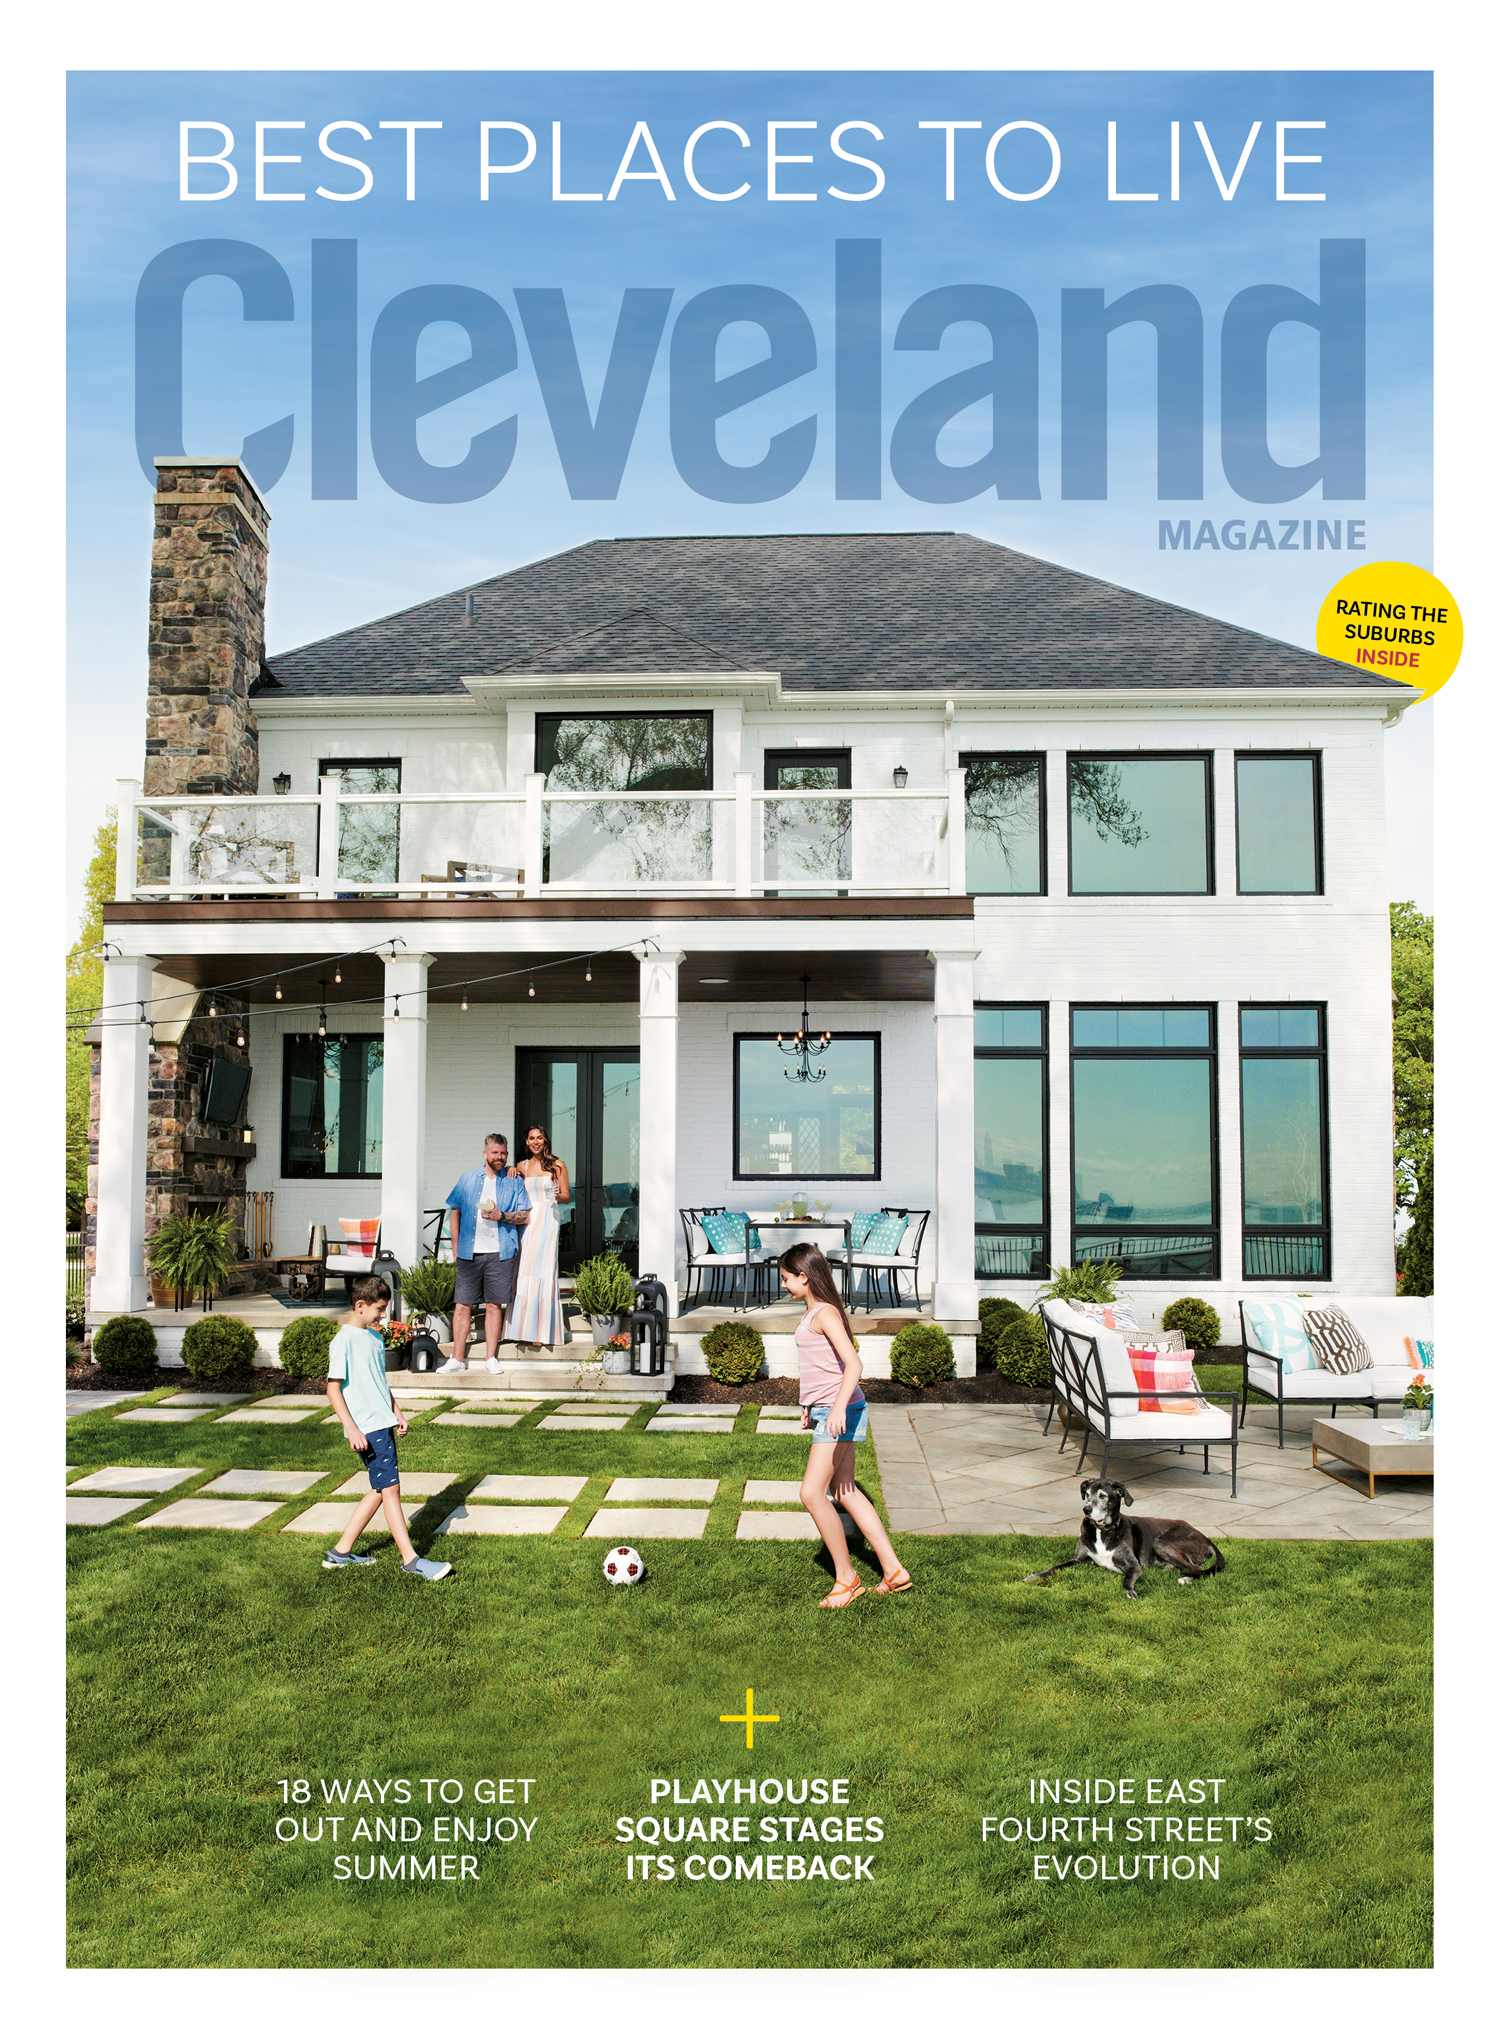 Best Places To Live, Cleveland Magazine, June 2021